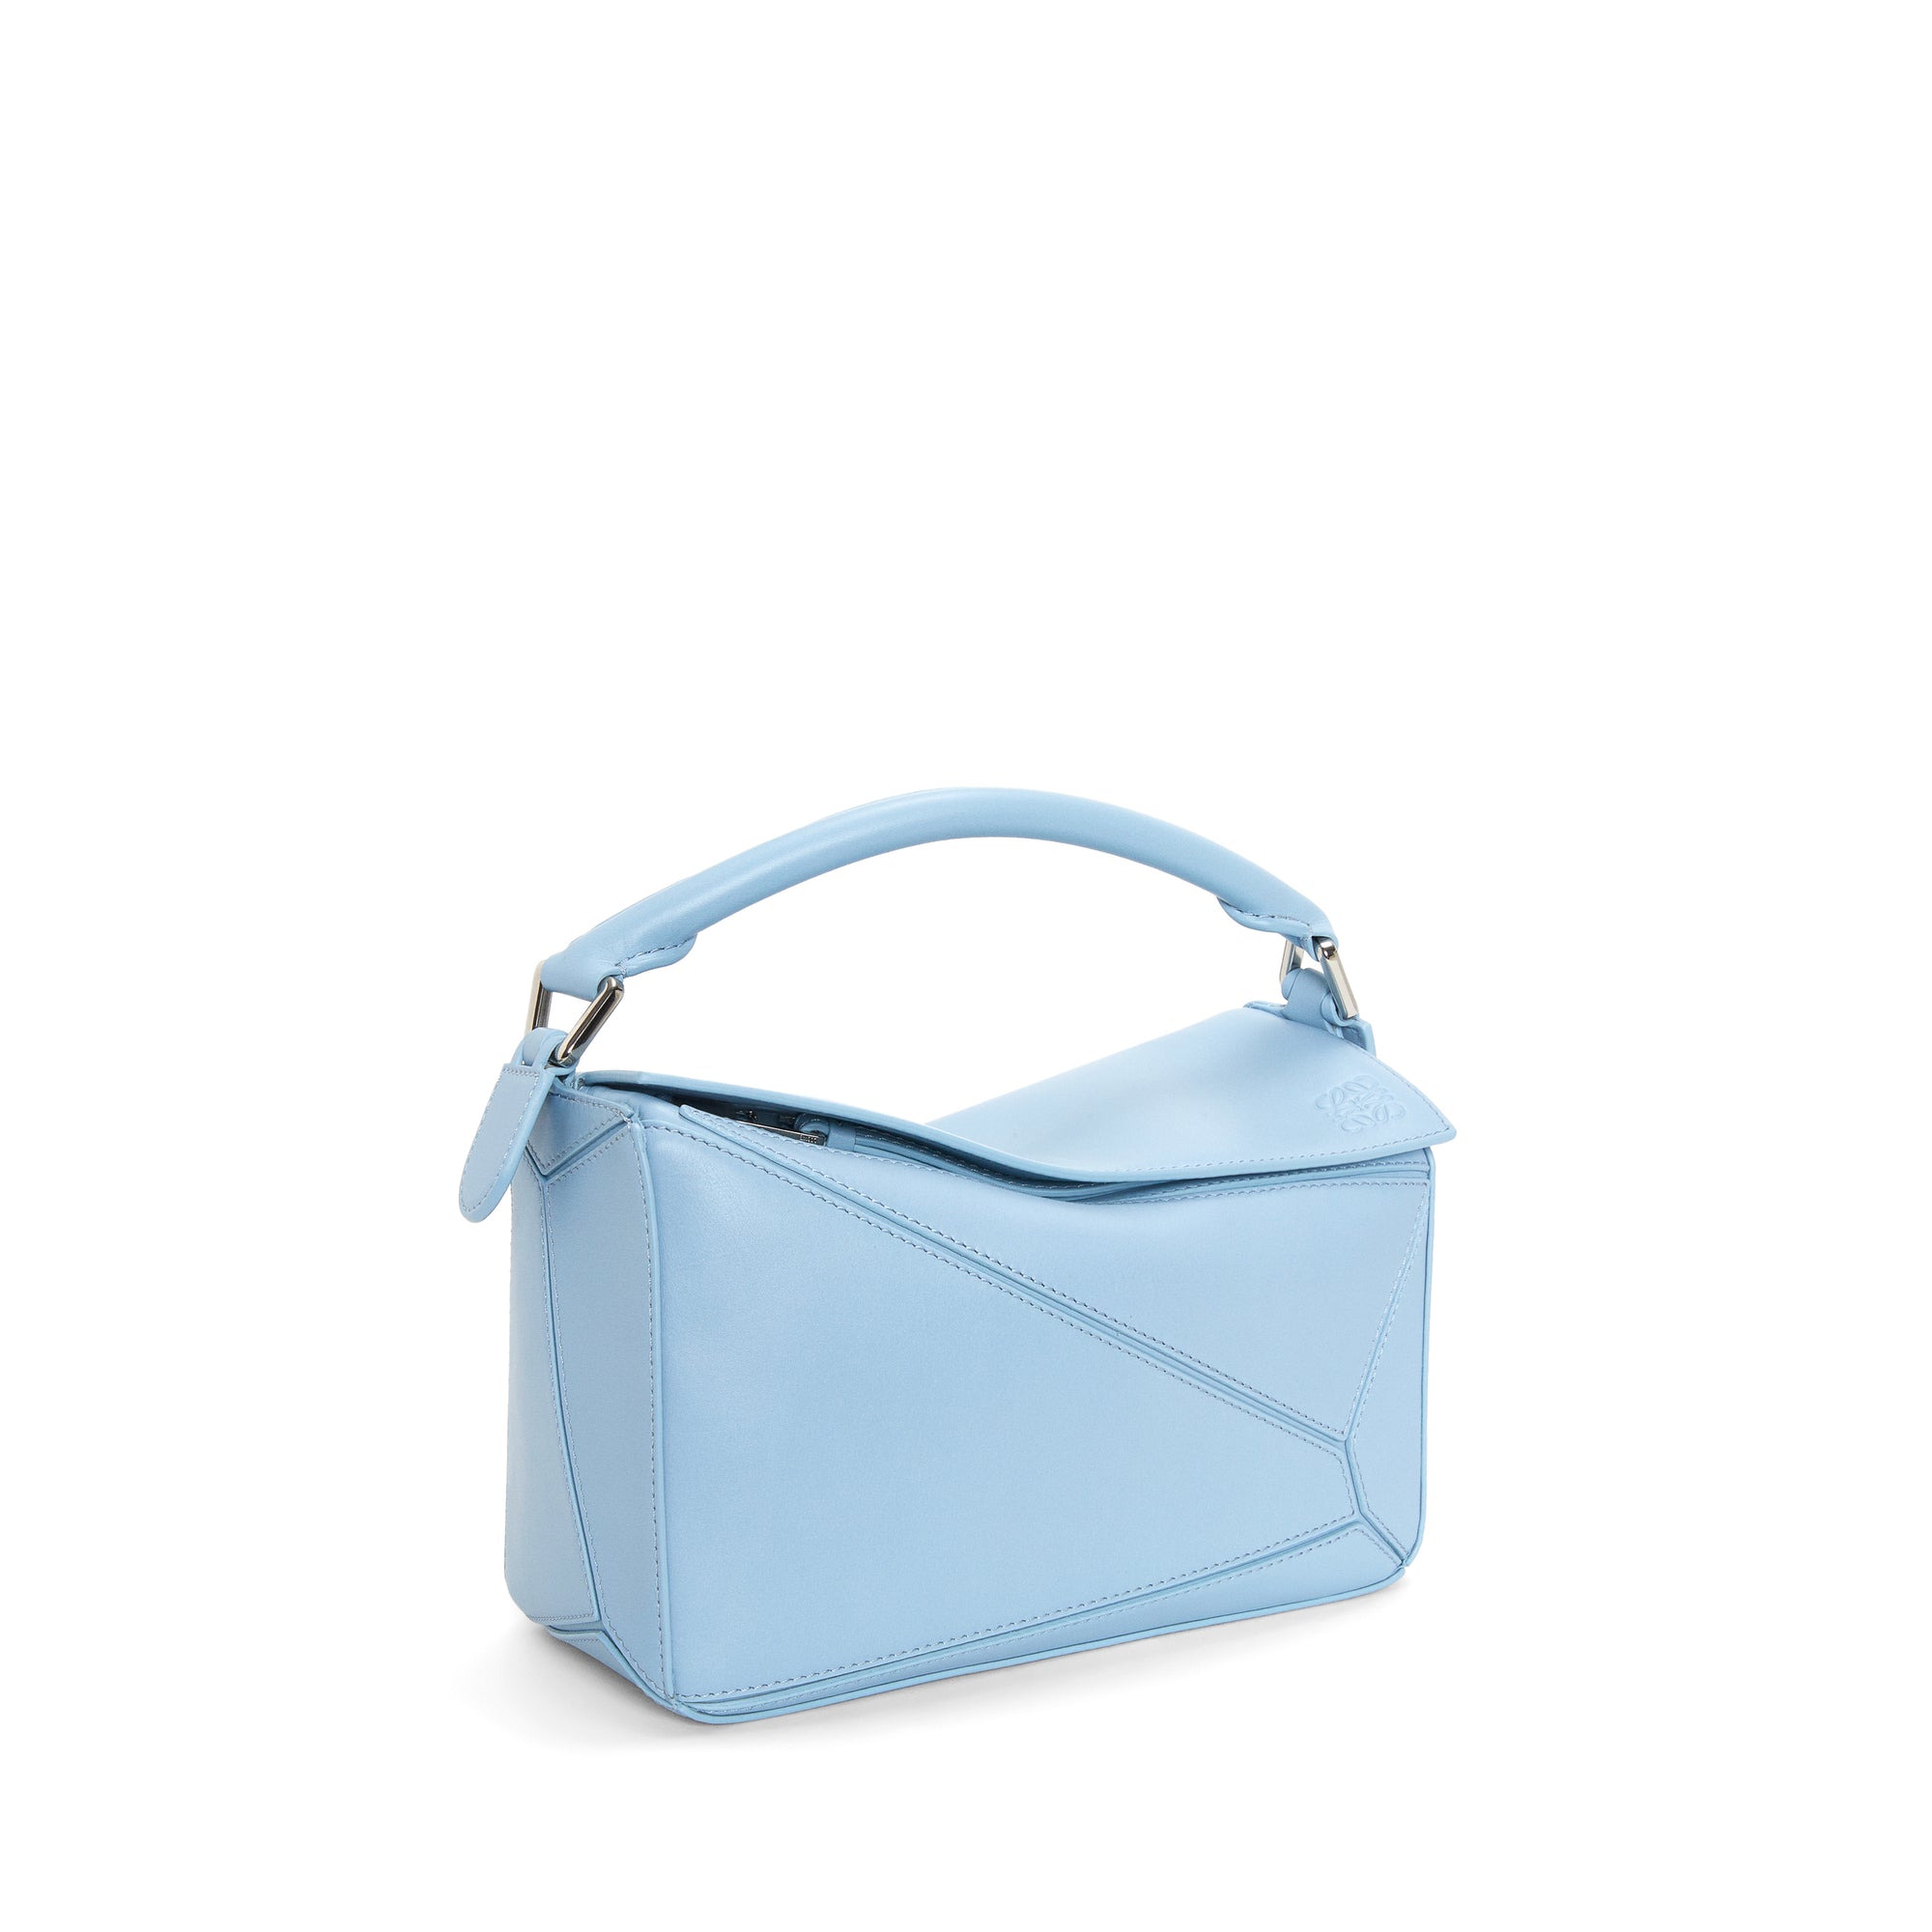 Loewe - Women’s Puzzle Small Bag - (Dusty Blue) view 5